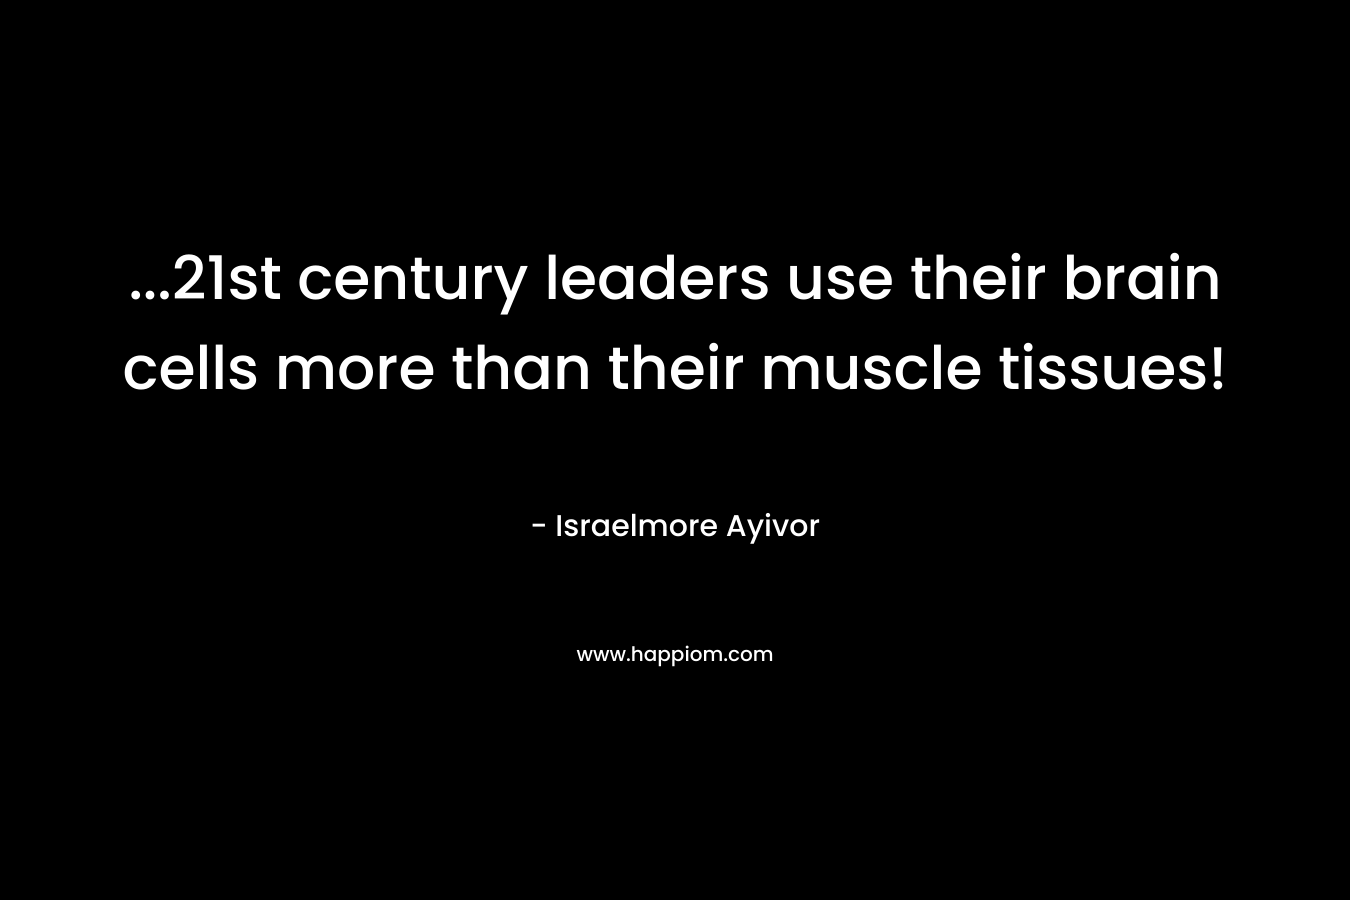 ...21st century leaders use their brain cells more than their muscle tissues!